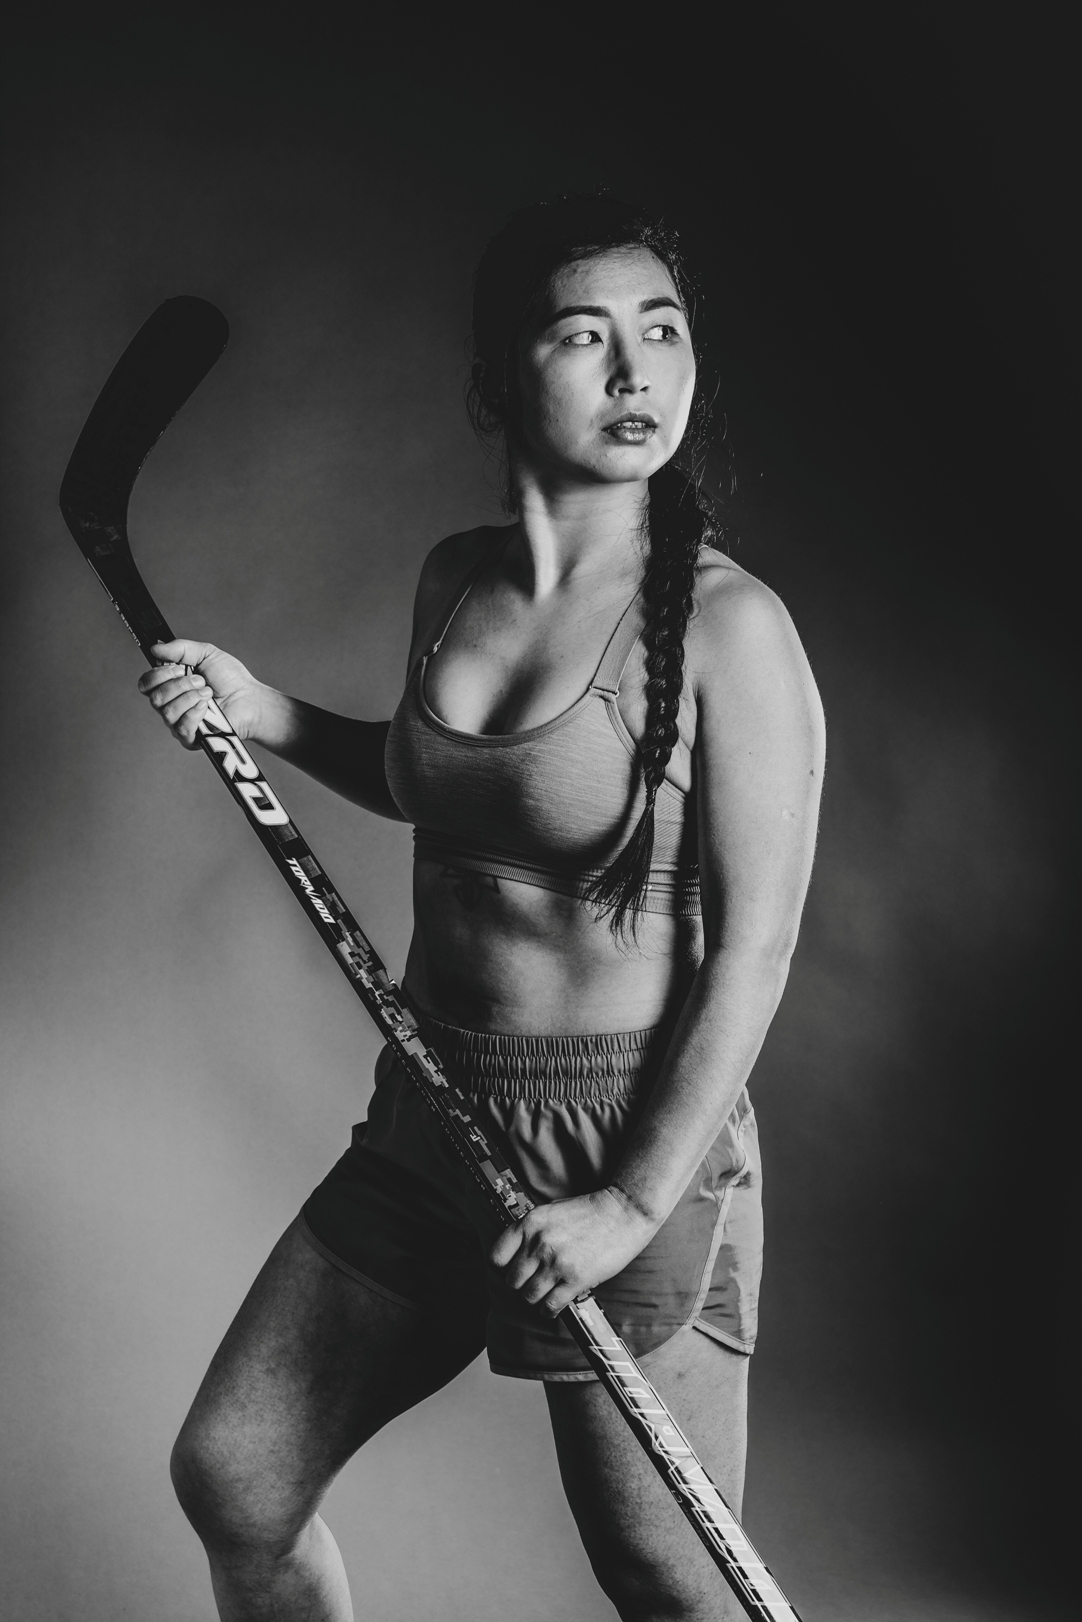 Bulbul Kartanbay – The First Kazakh Athlete to Play in the NWHL